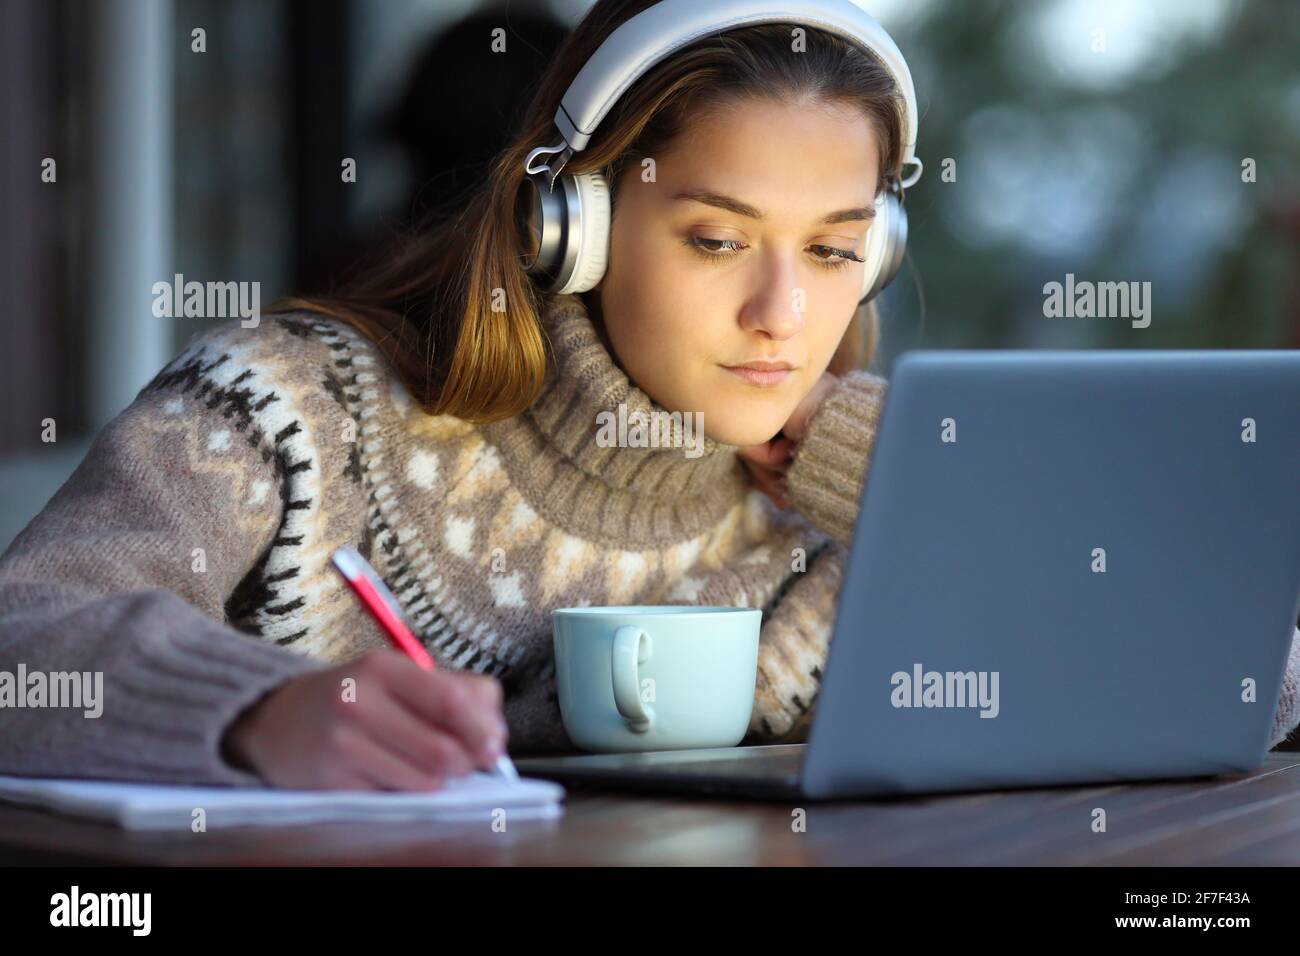 Concentrated student wearing headphones e-learning with laptop taking notes on notebook in a coffee shop in winter Stock Photo